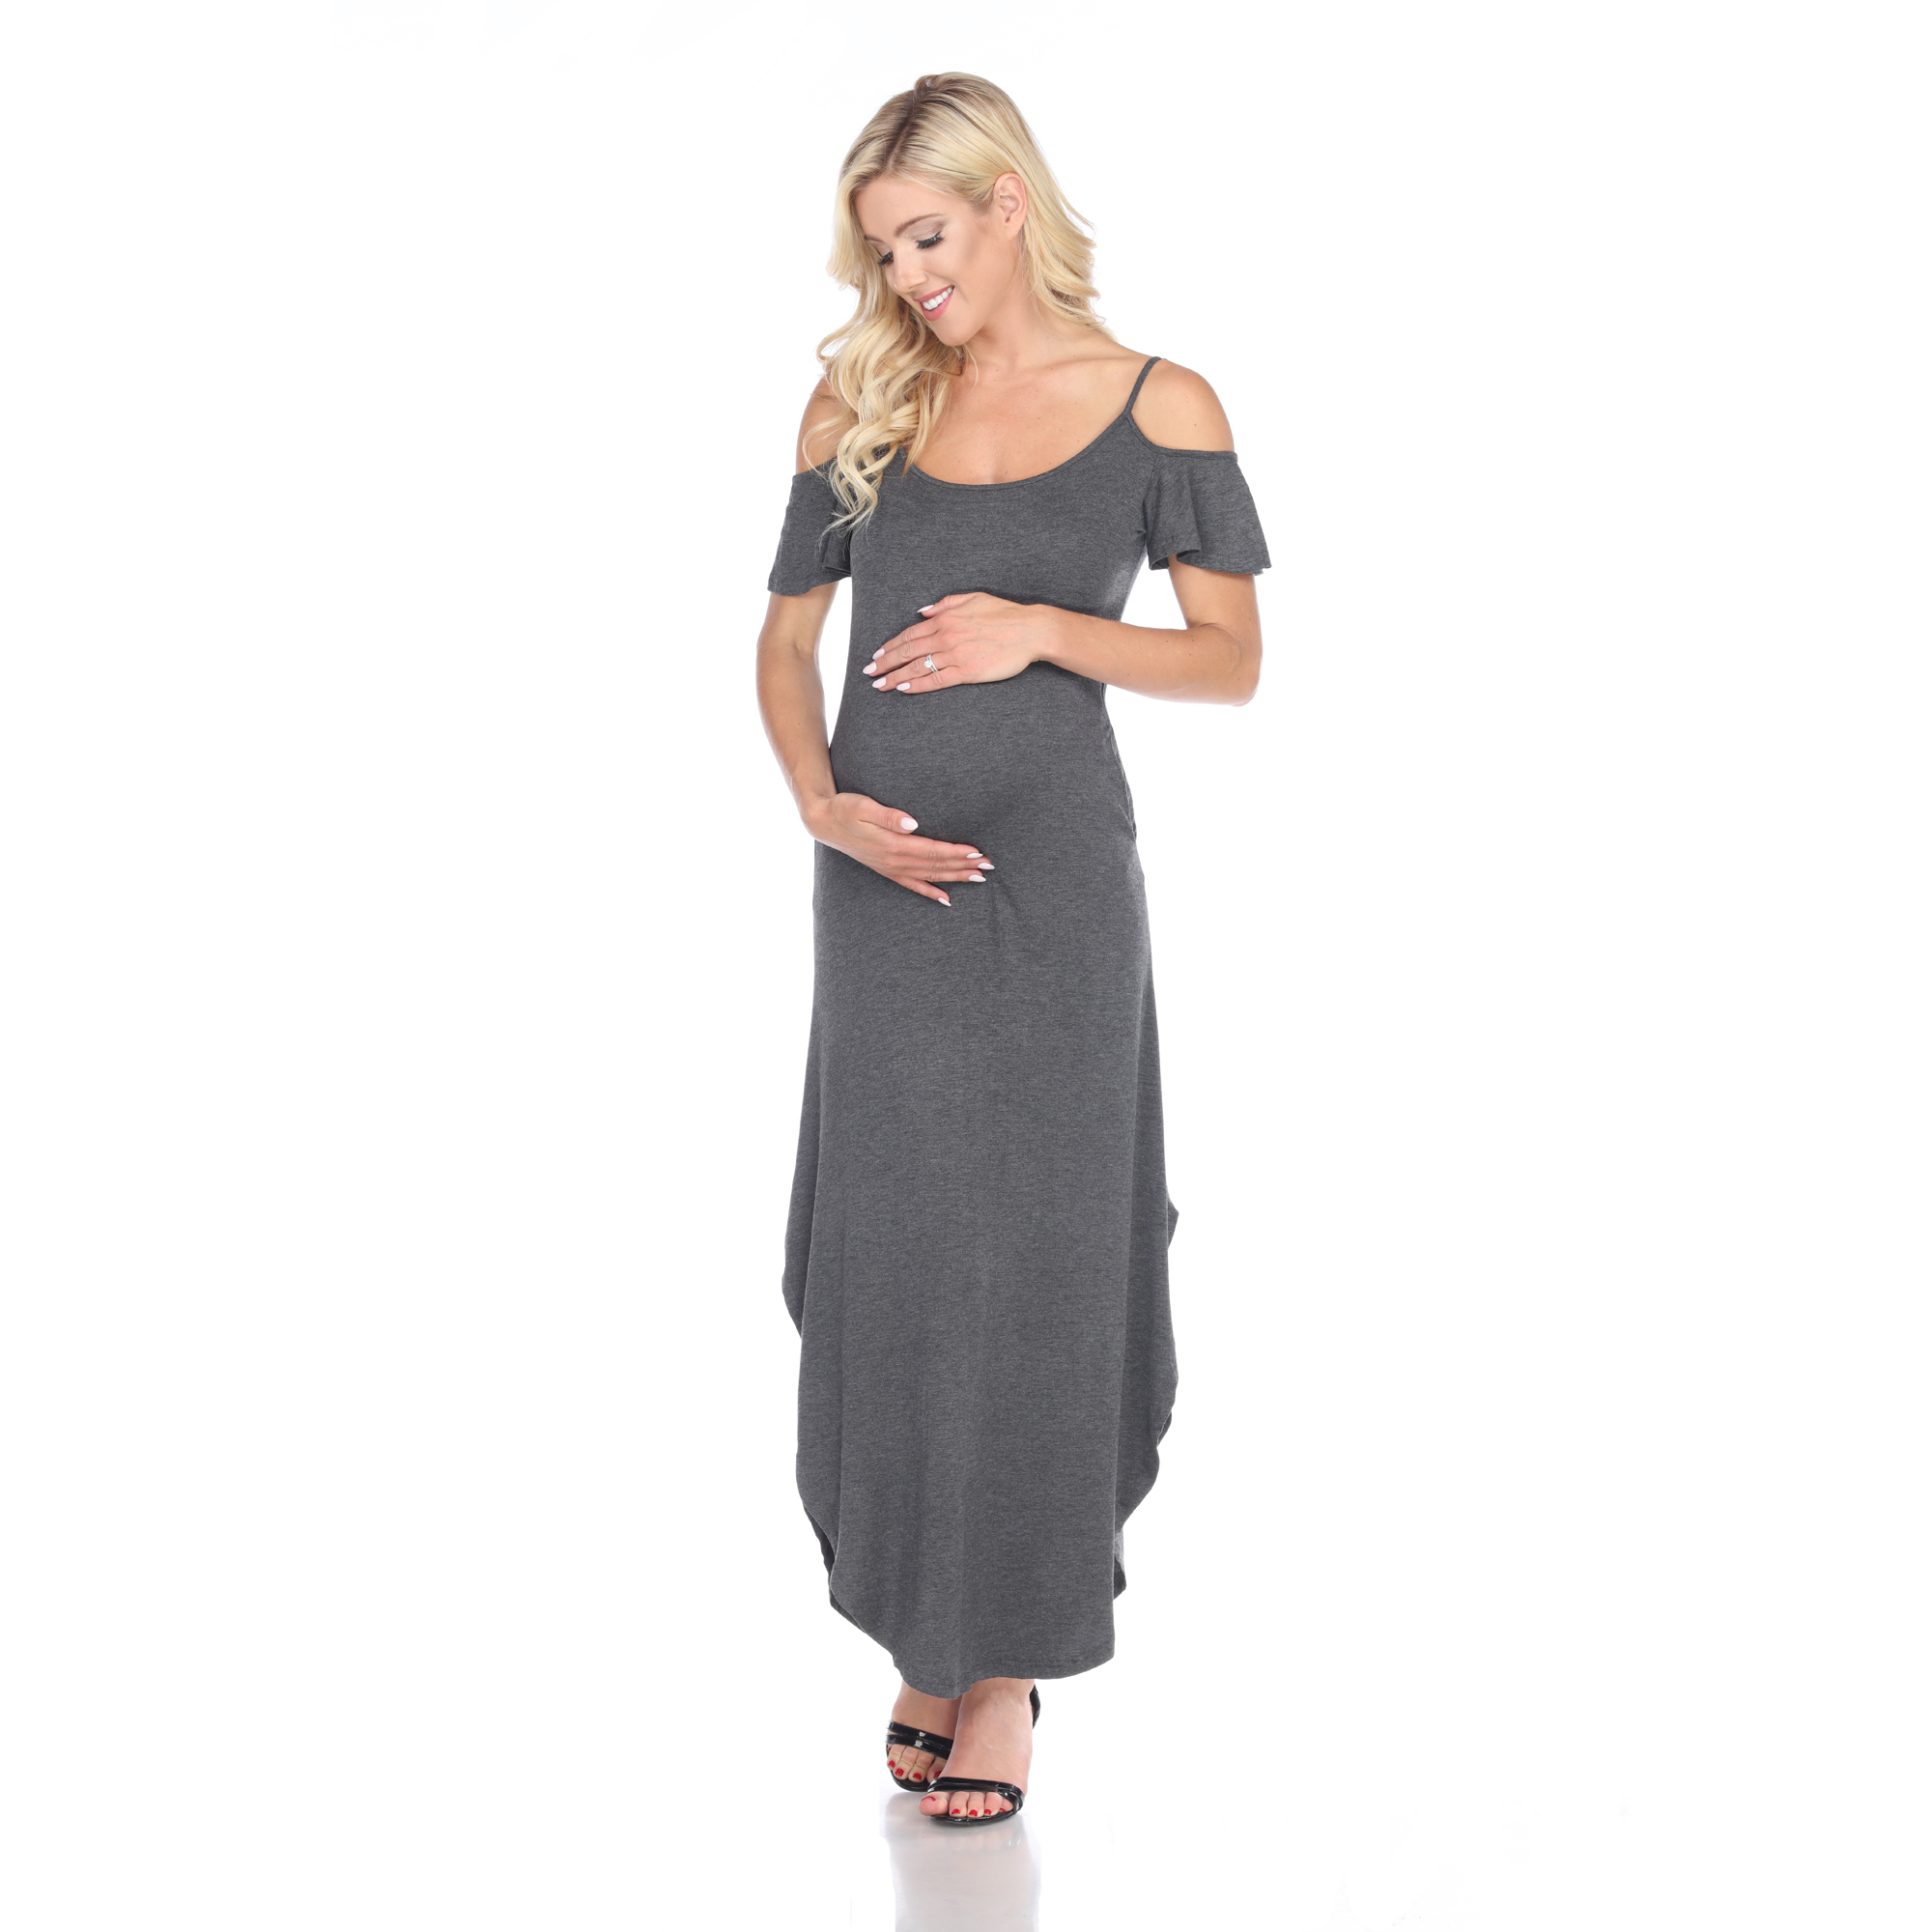 White Mark Women's Maternity Cold Shoulder Maxi Dress - Charcoal, X-Large